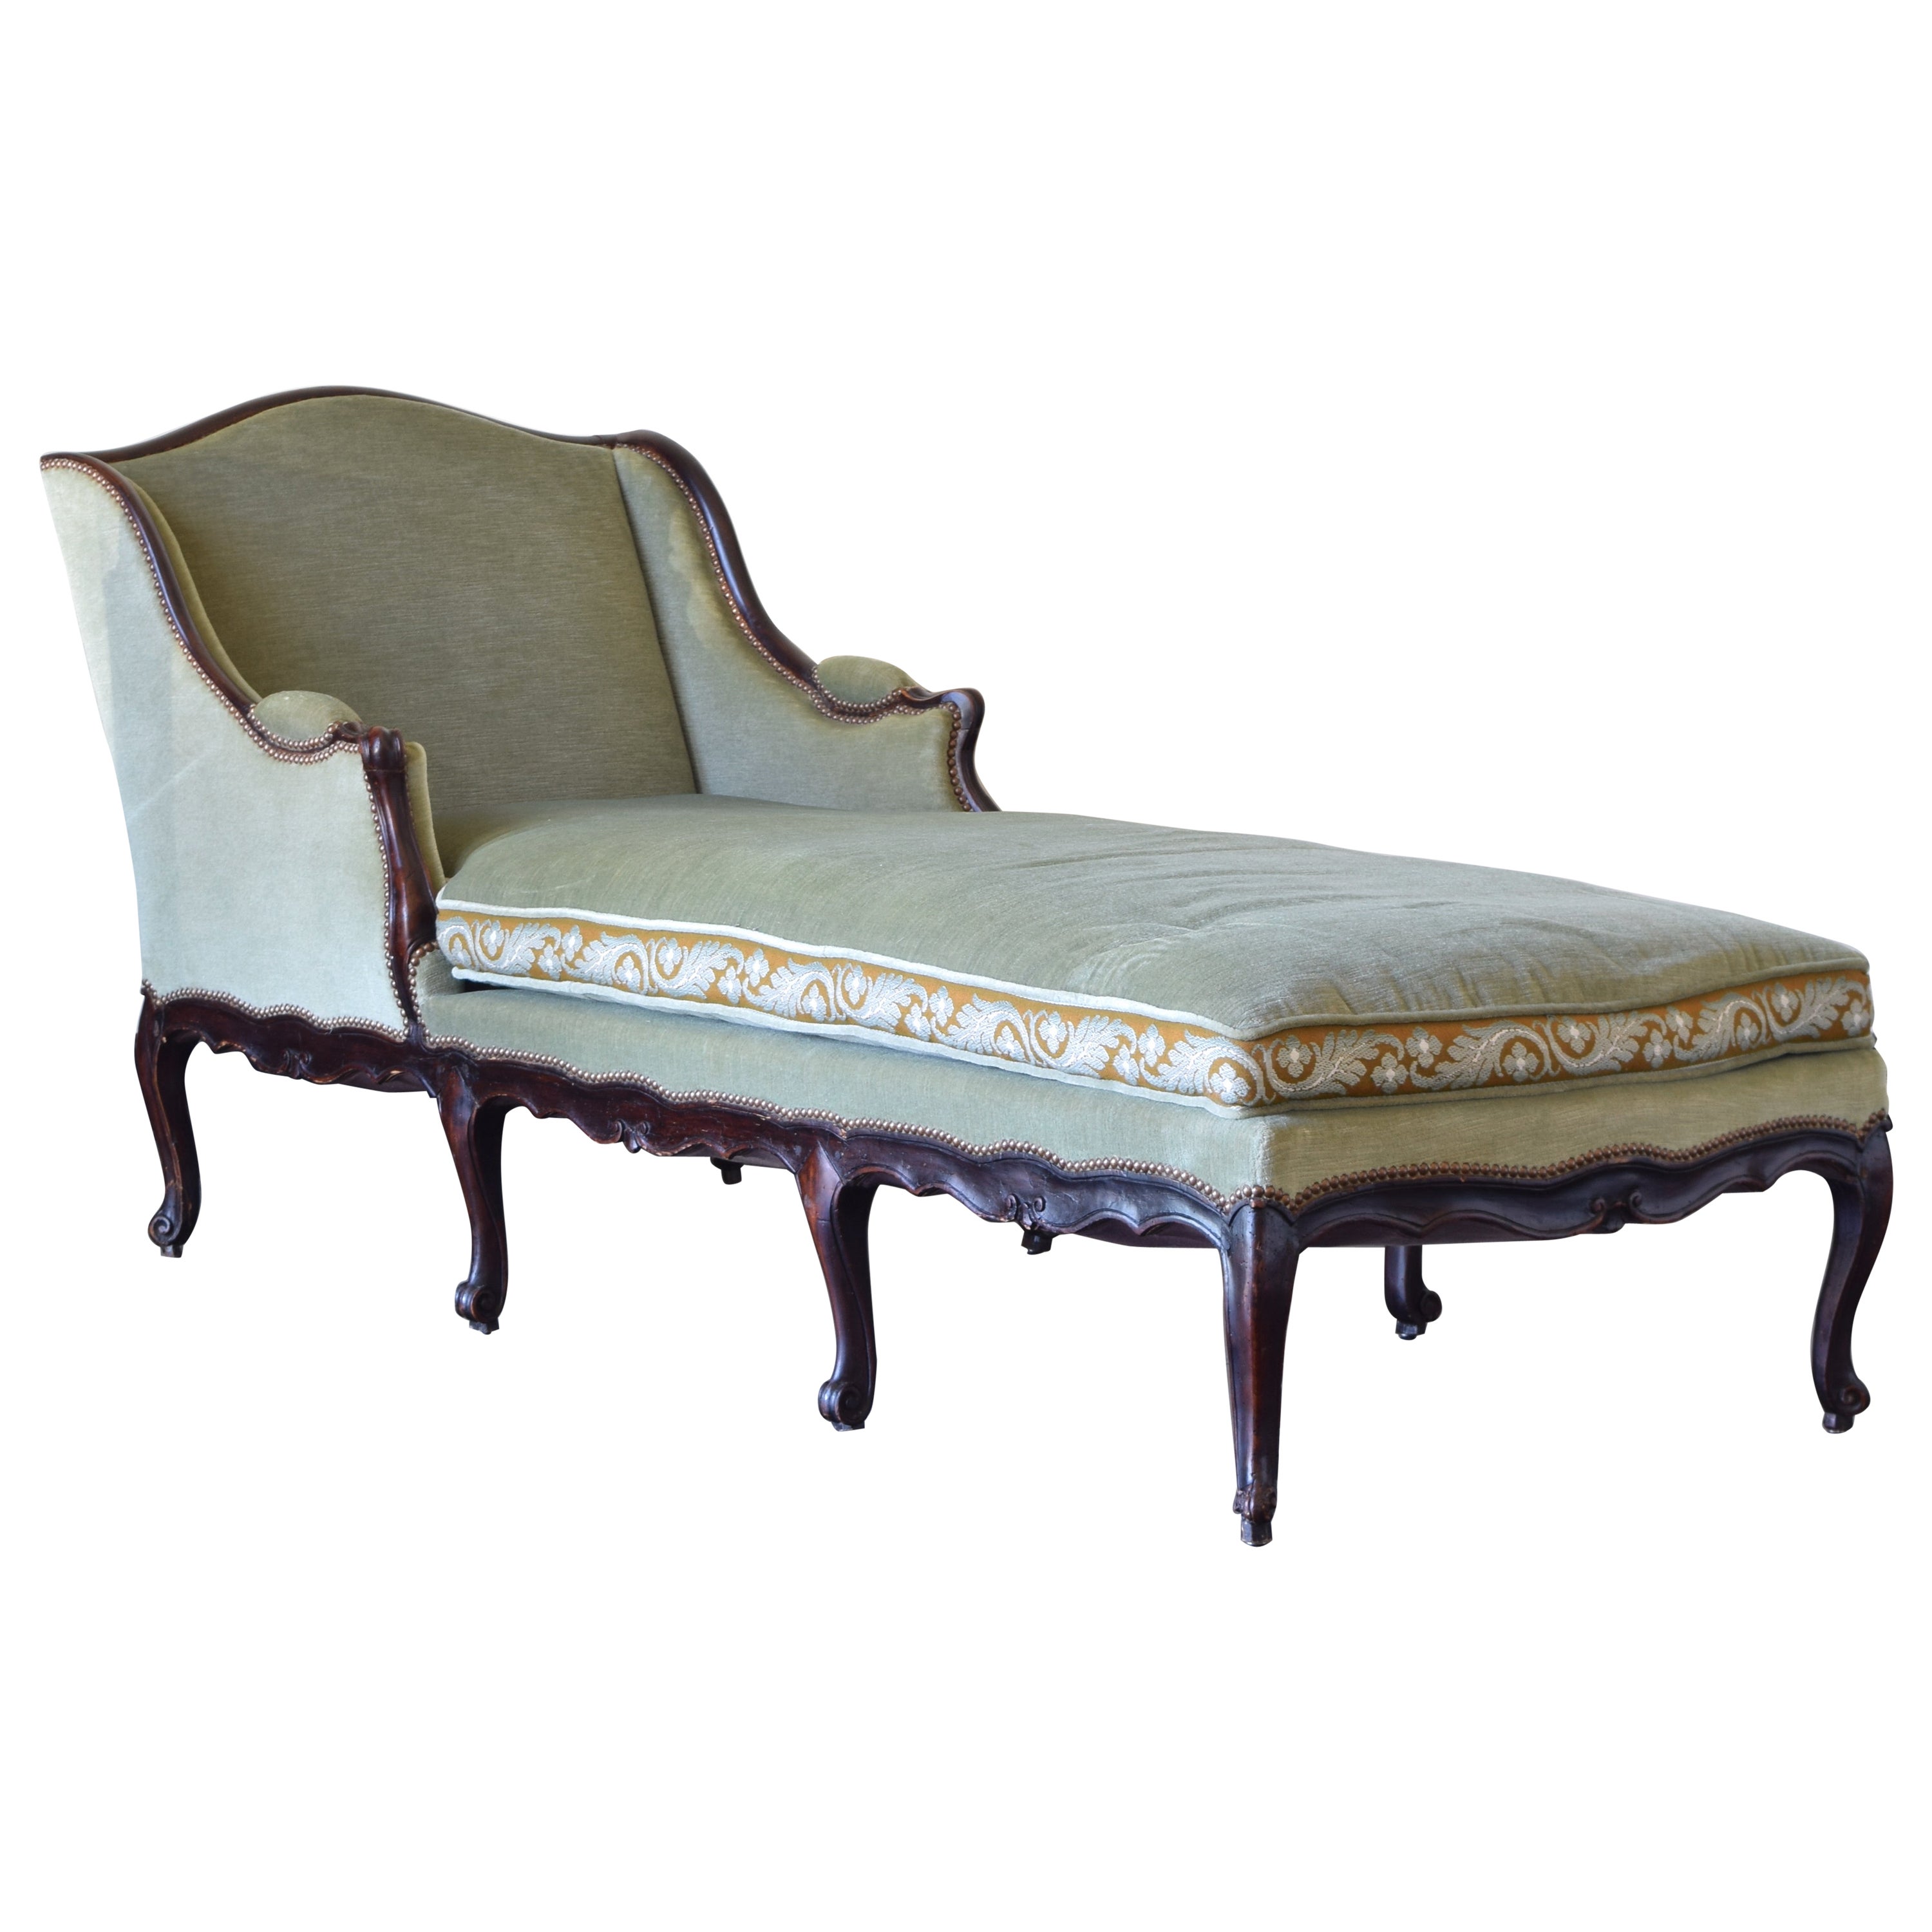 French Louis XV Period Carved Walnut & Upholstered Chaise Lounge, mid 18th cen. For Sale